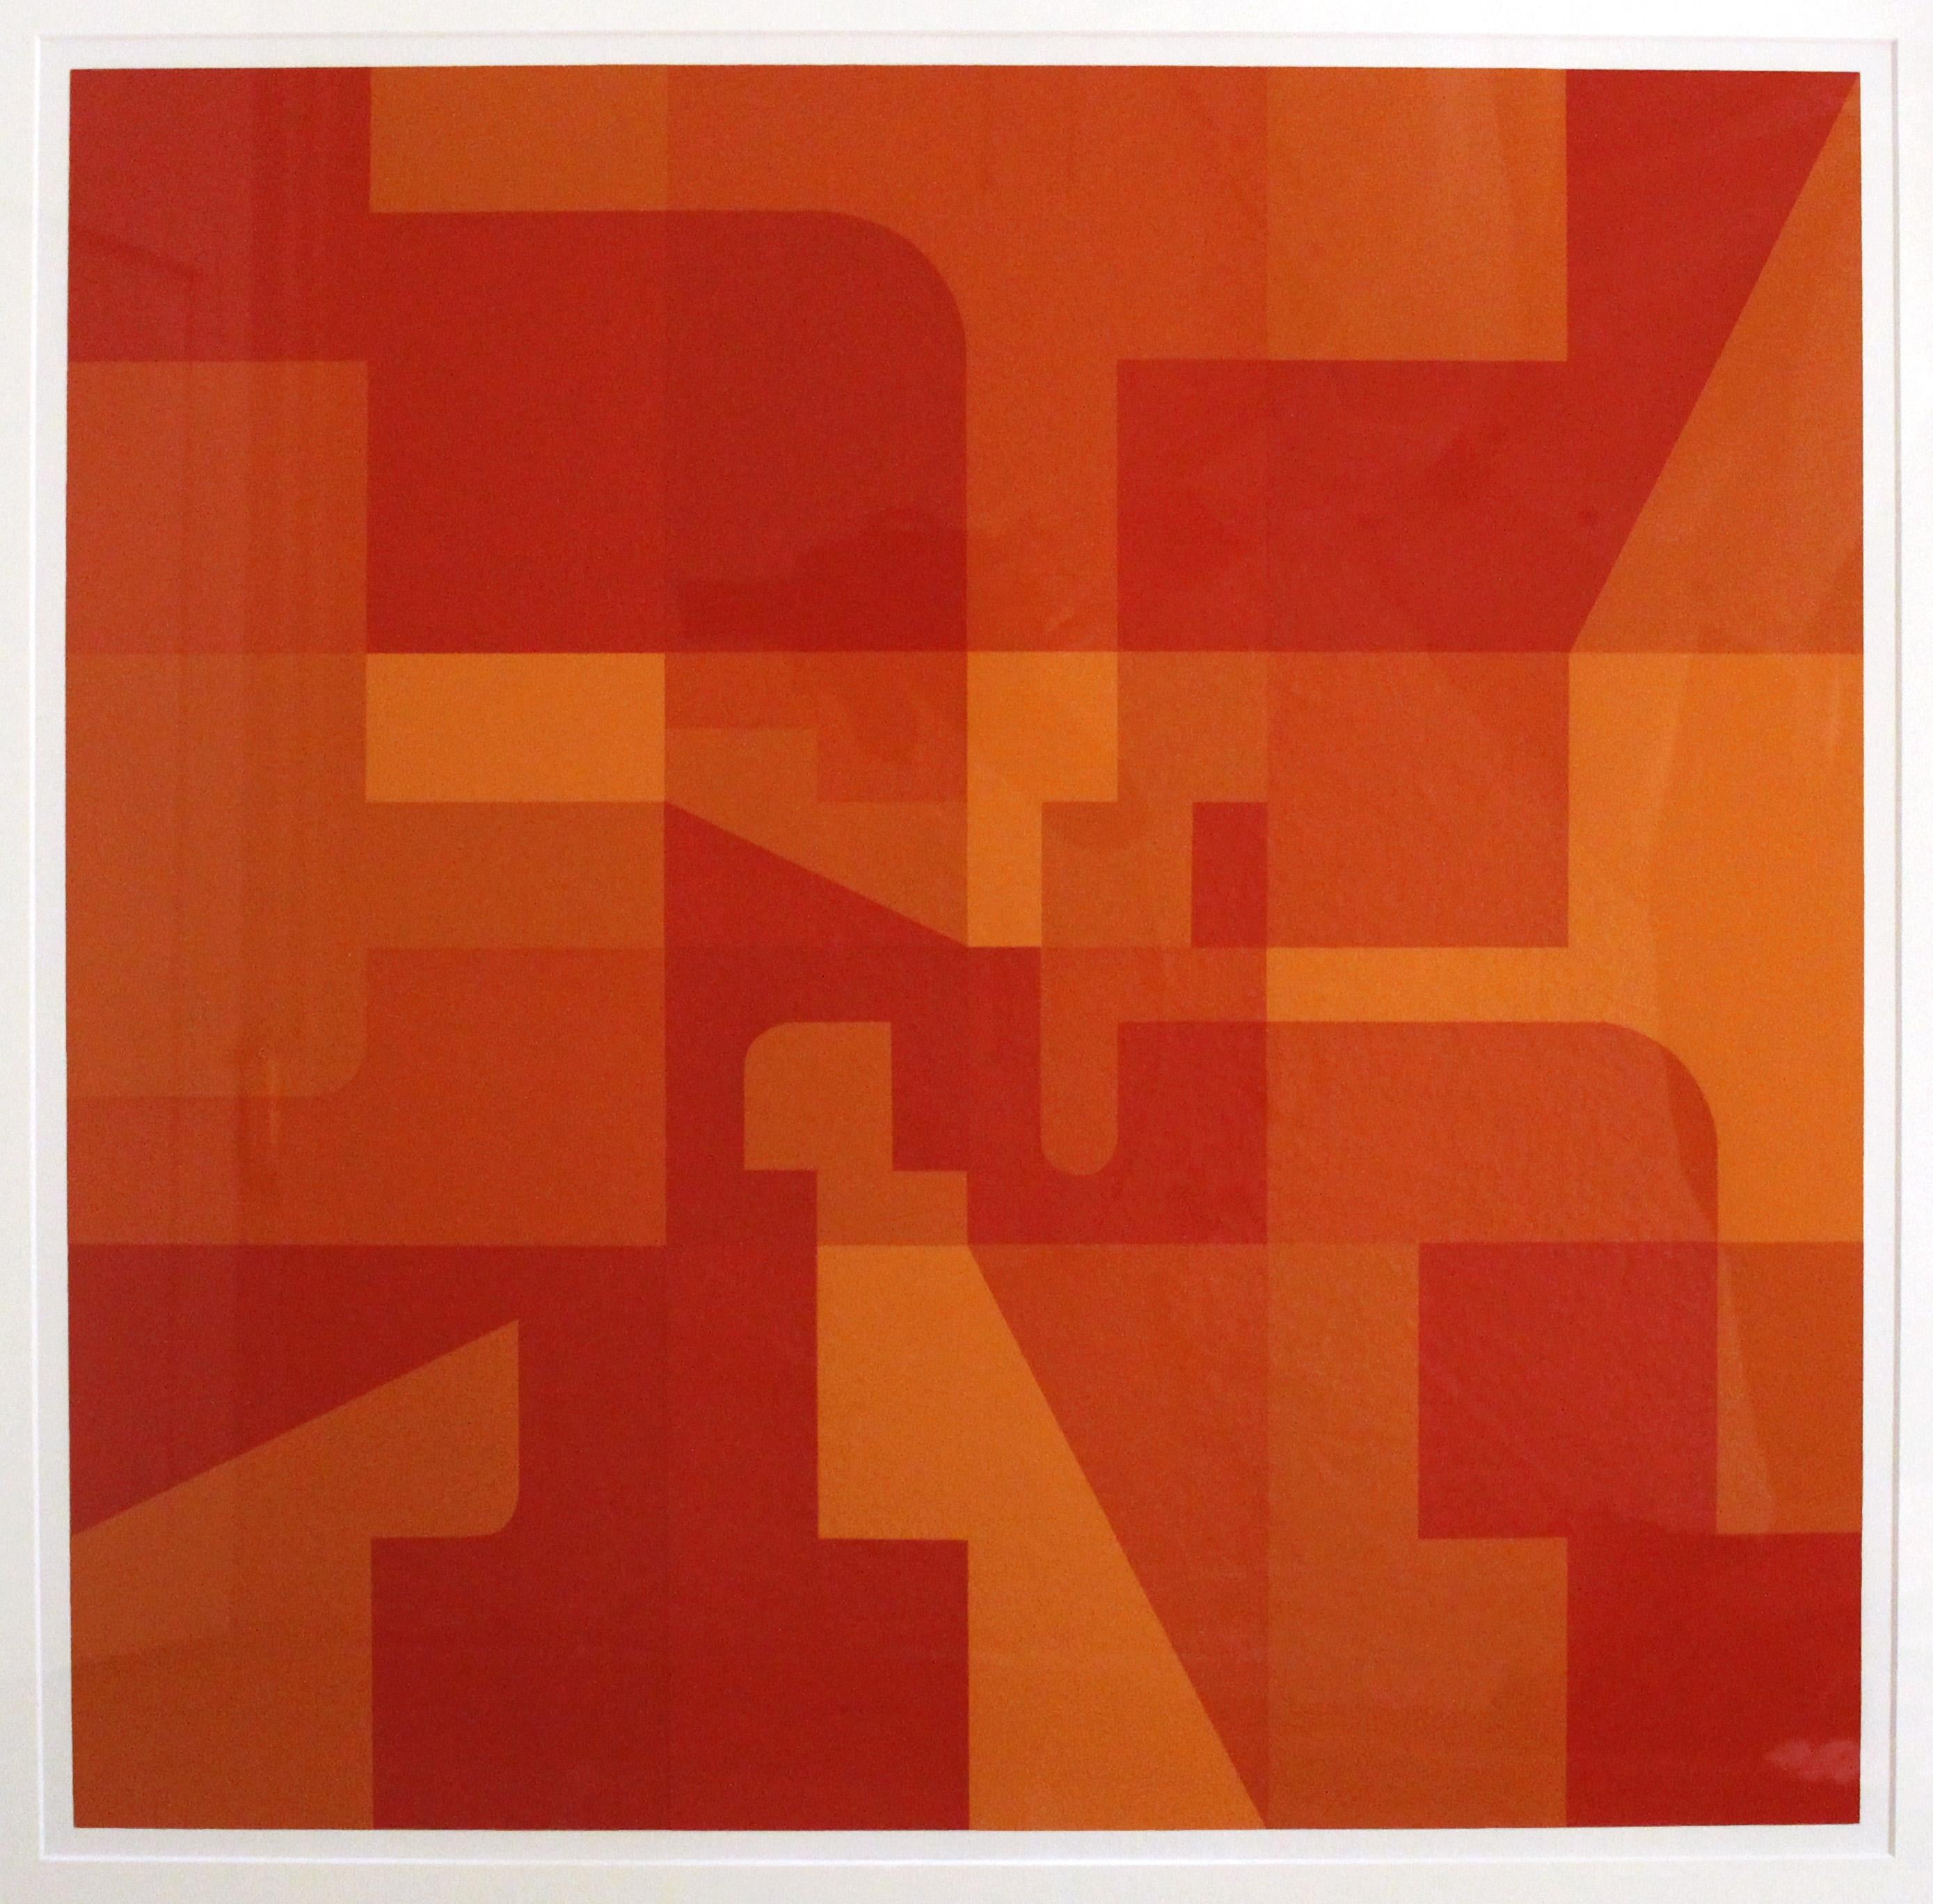 1970 Screen print, C-Di1a, by Norman Ives (American, 1923-1978). The title identified through known signed examples. Studied under Josef Albers & Herbert Matter at Yale University. Upon graduation in 1952 he became a member of the Yale Faculty.